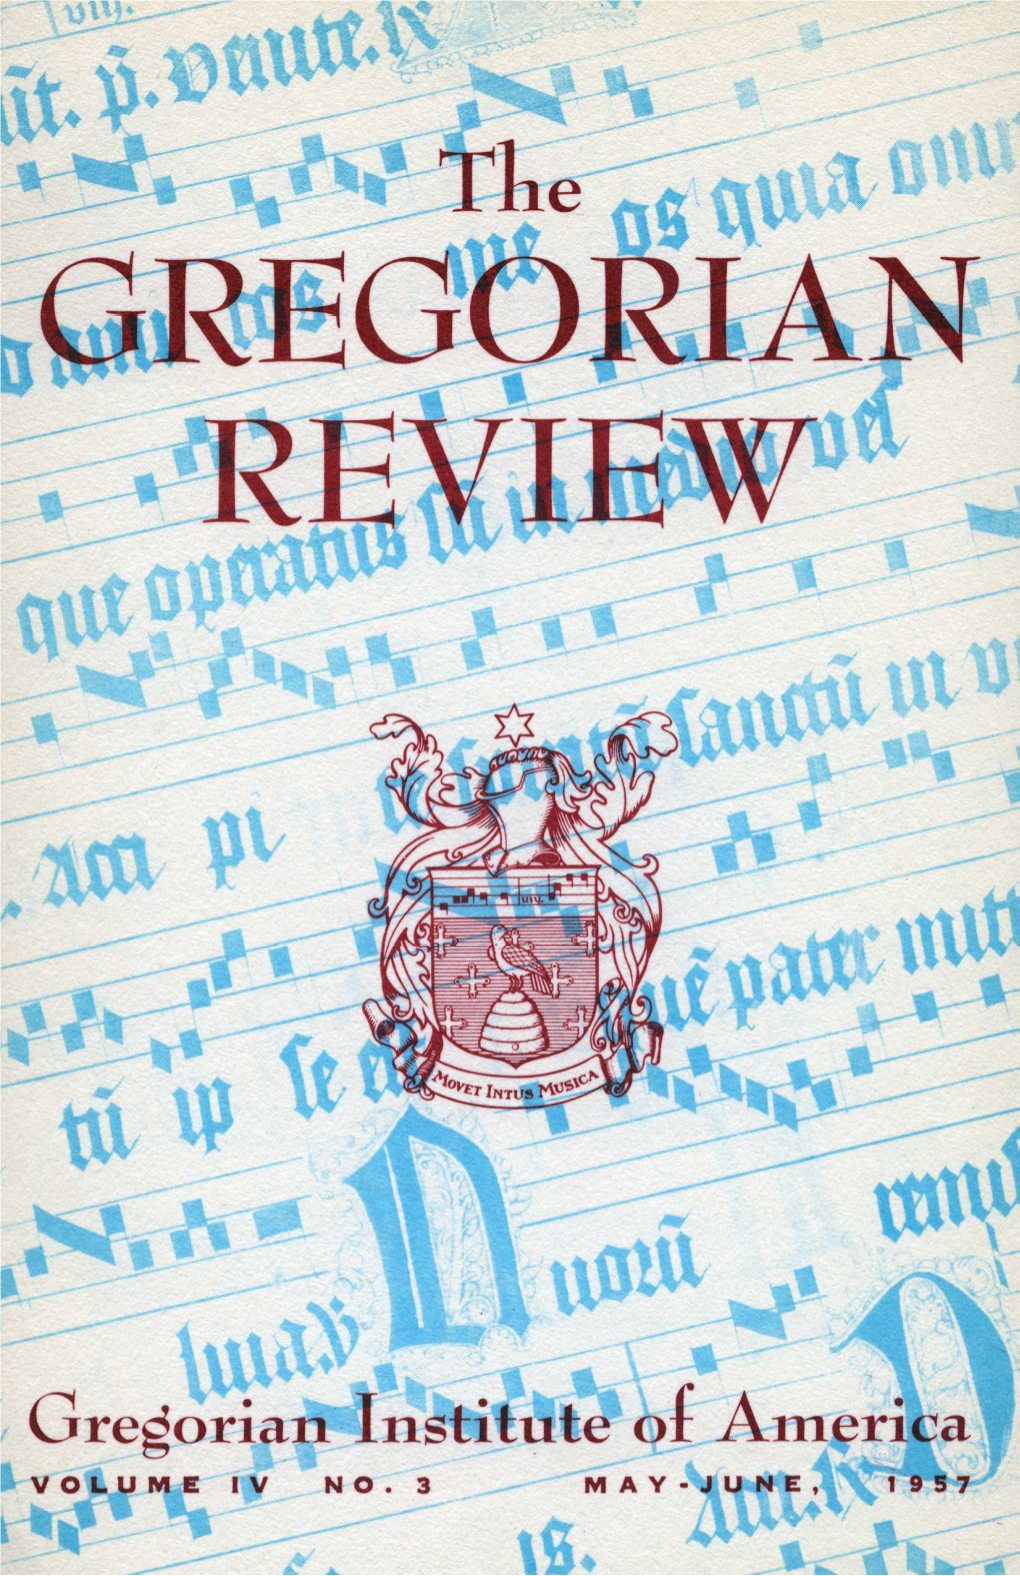 The GREGORIAN REVIEW